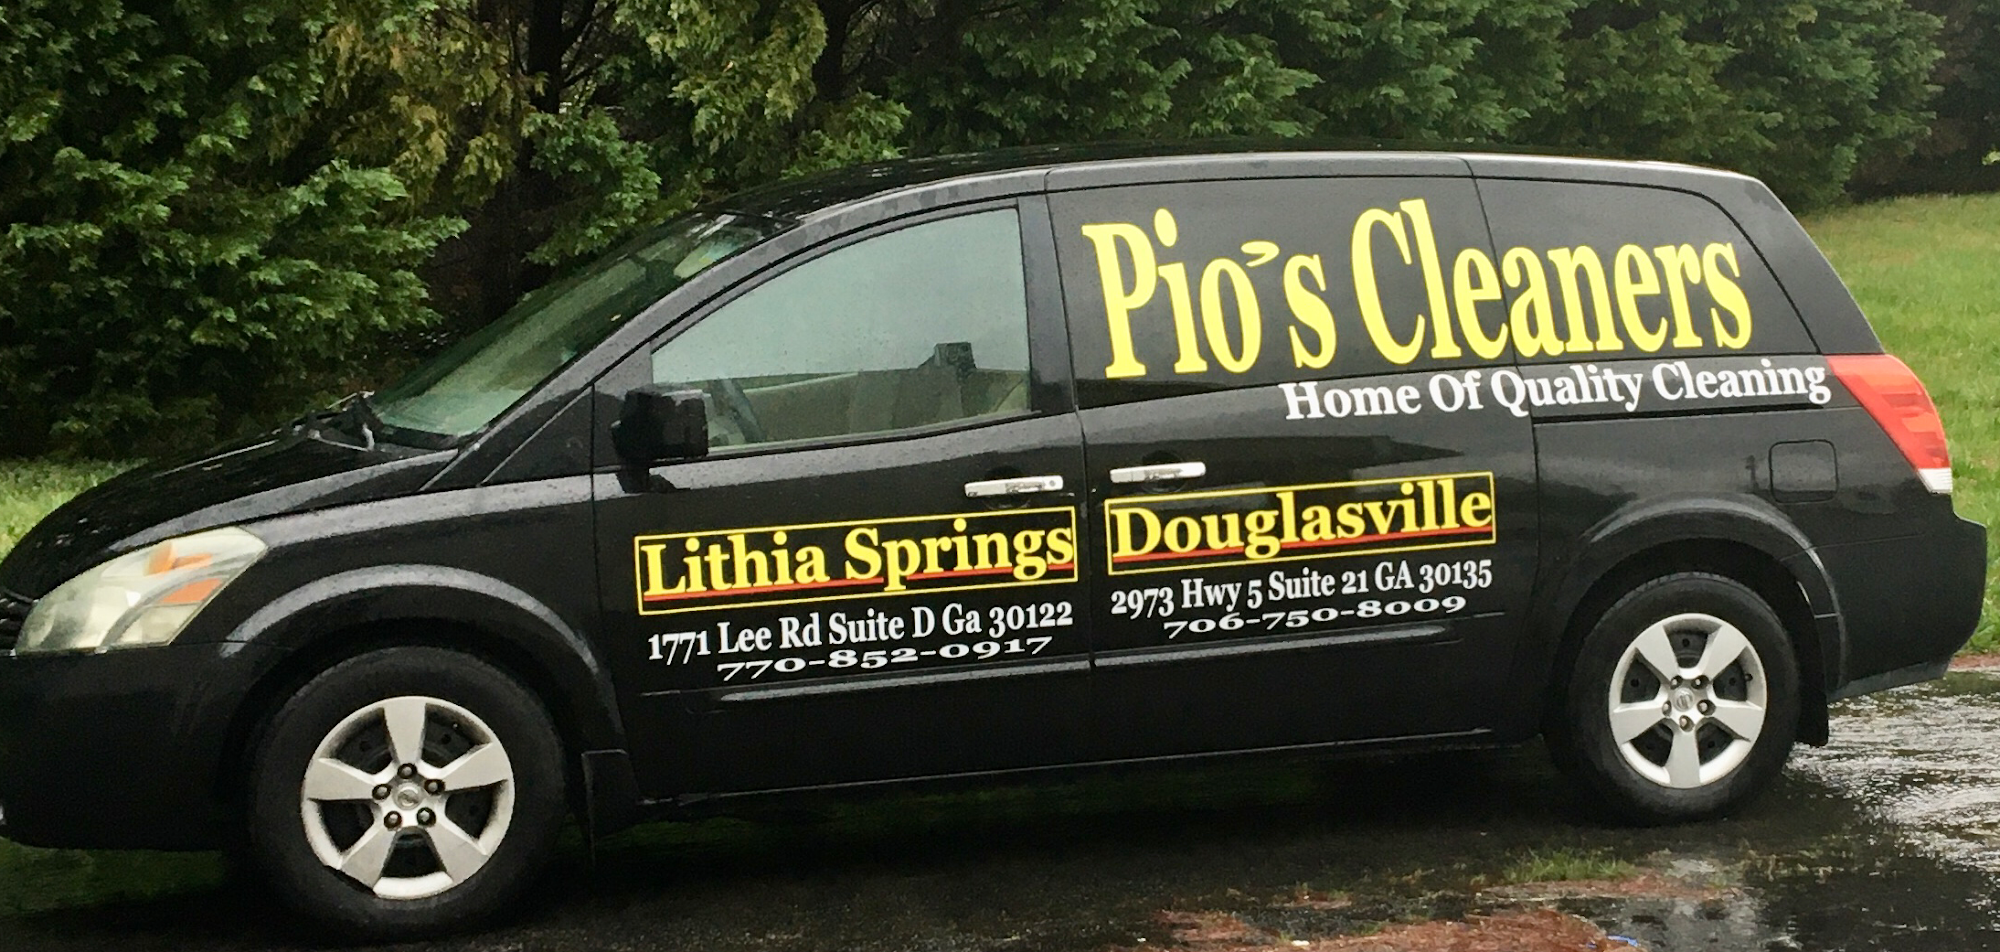 Pio’s Cleaners